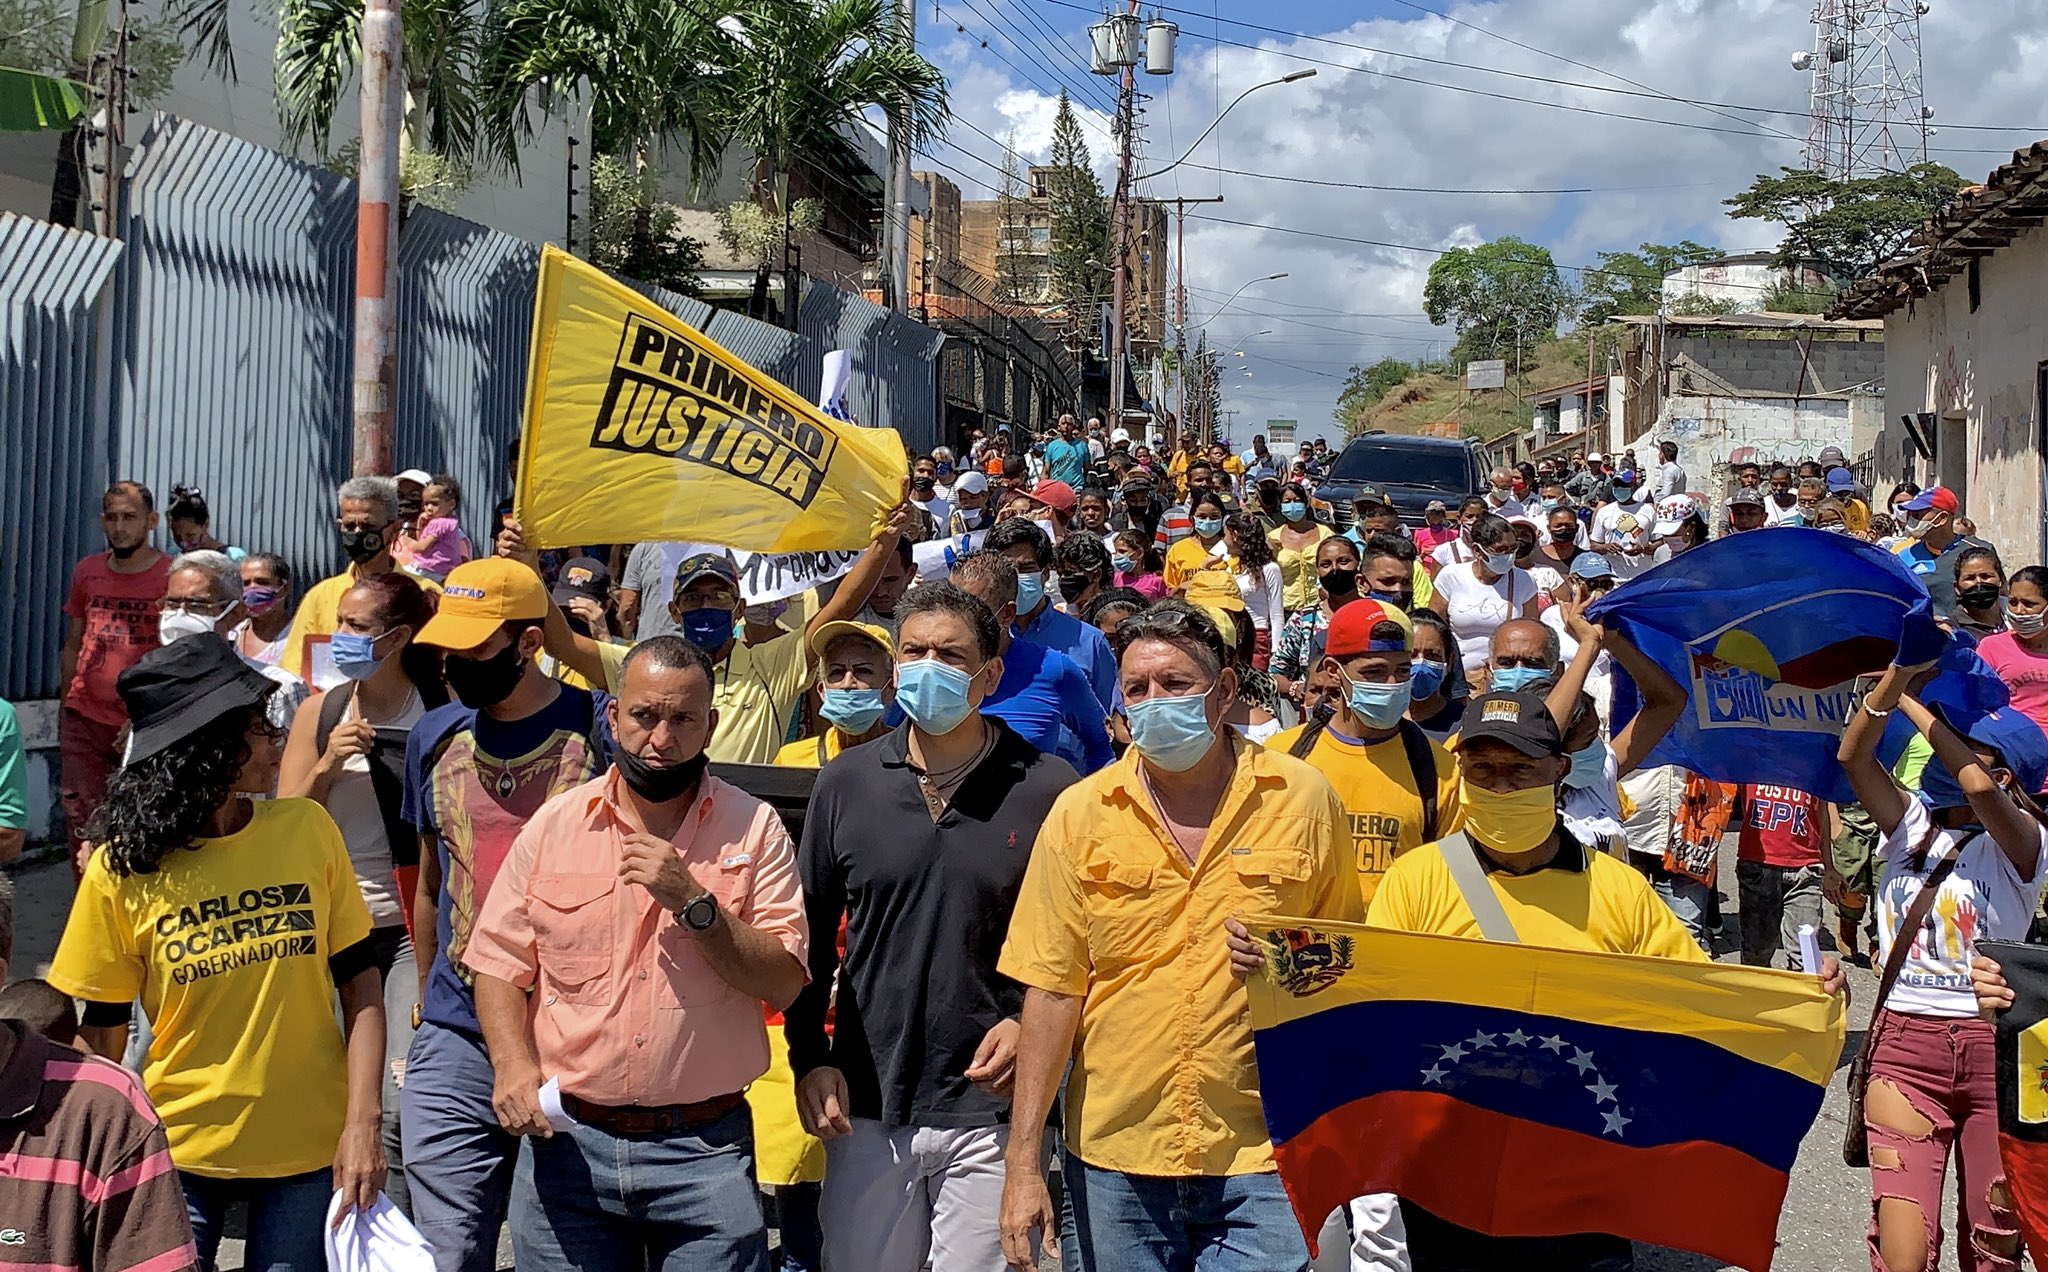 Featured image: Venezuelan opposition politician, Carlos Ocariz from extreme right Primero Justicia party is preparing the ground for governor elections in Miranda state less than 2 months after calling for abstention under alleged lack of democratic conditions. Photo courtesy of @CarlosOcariz.